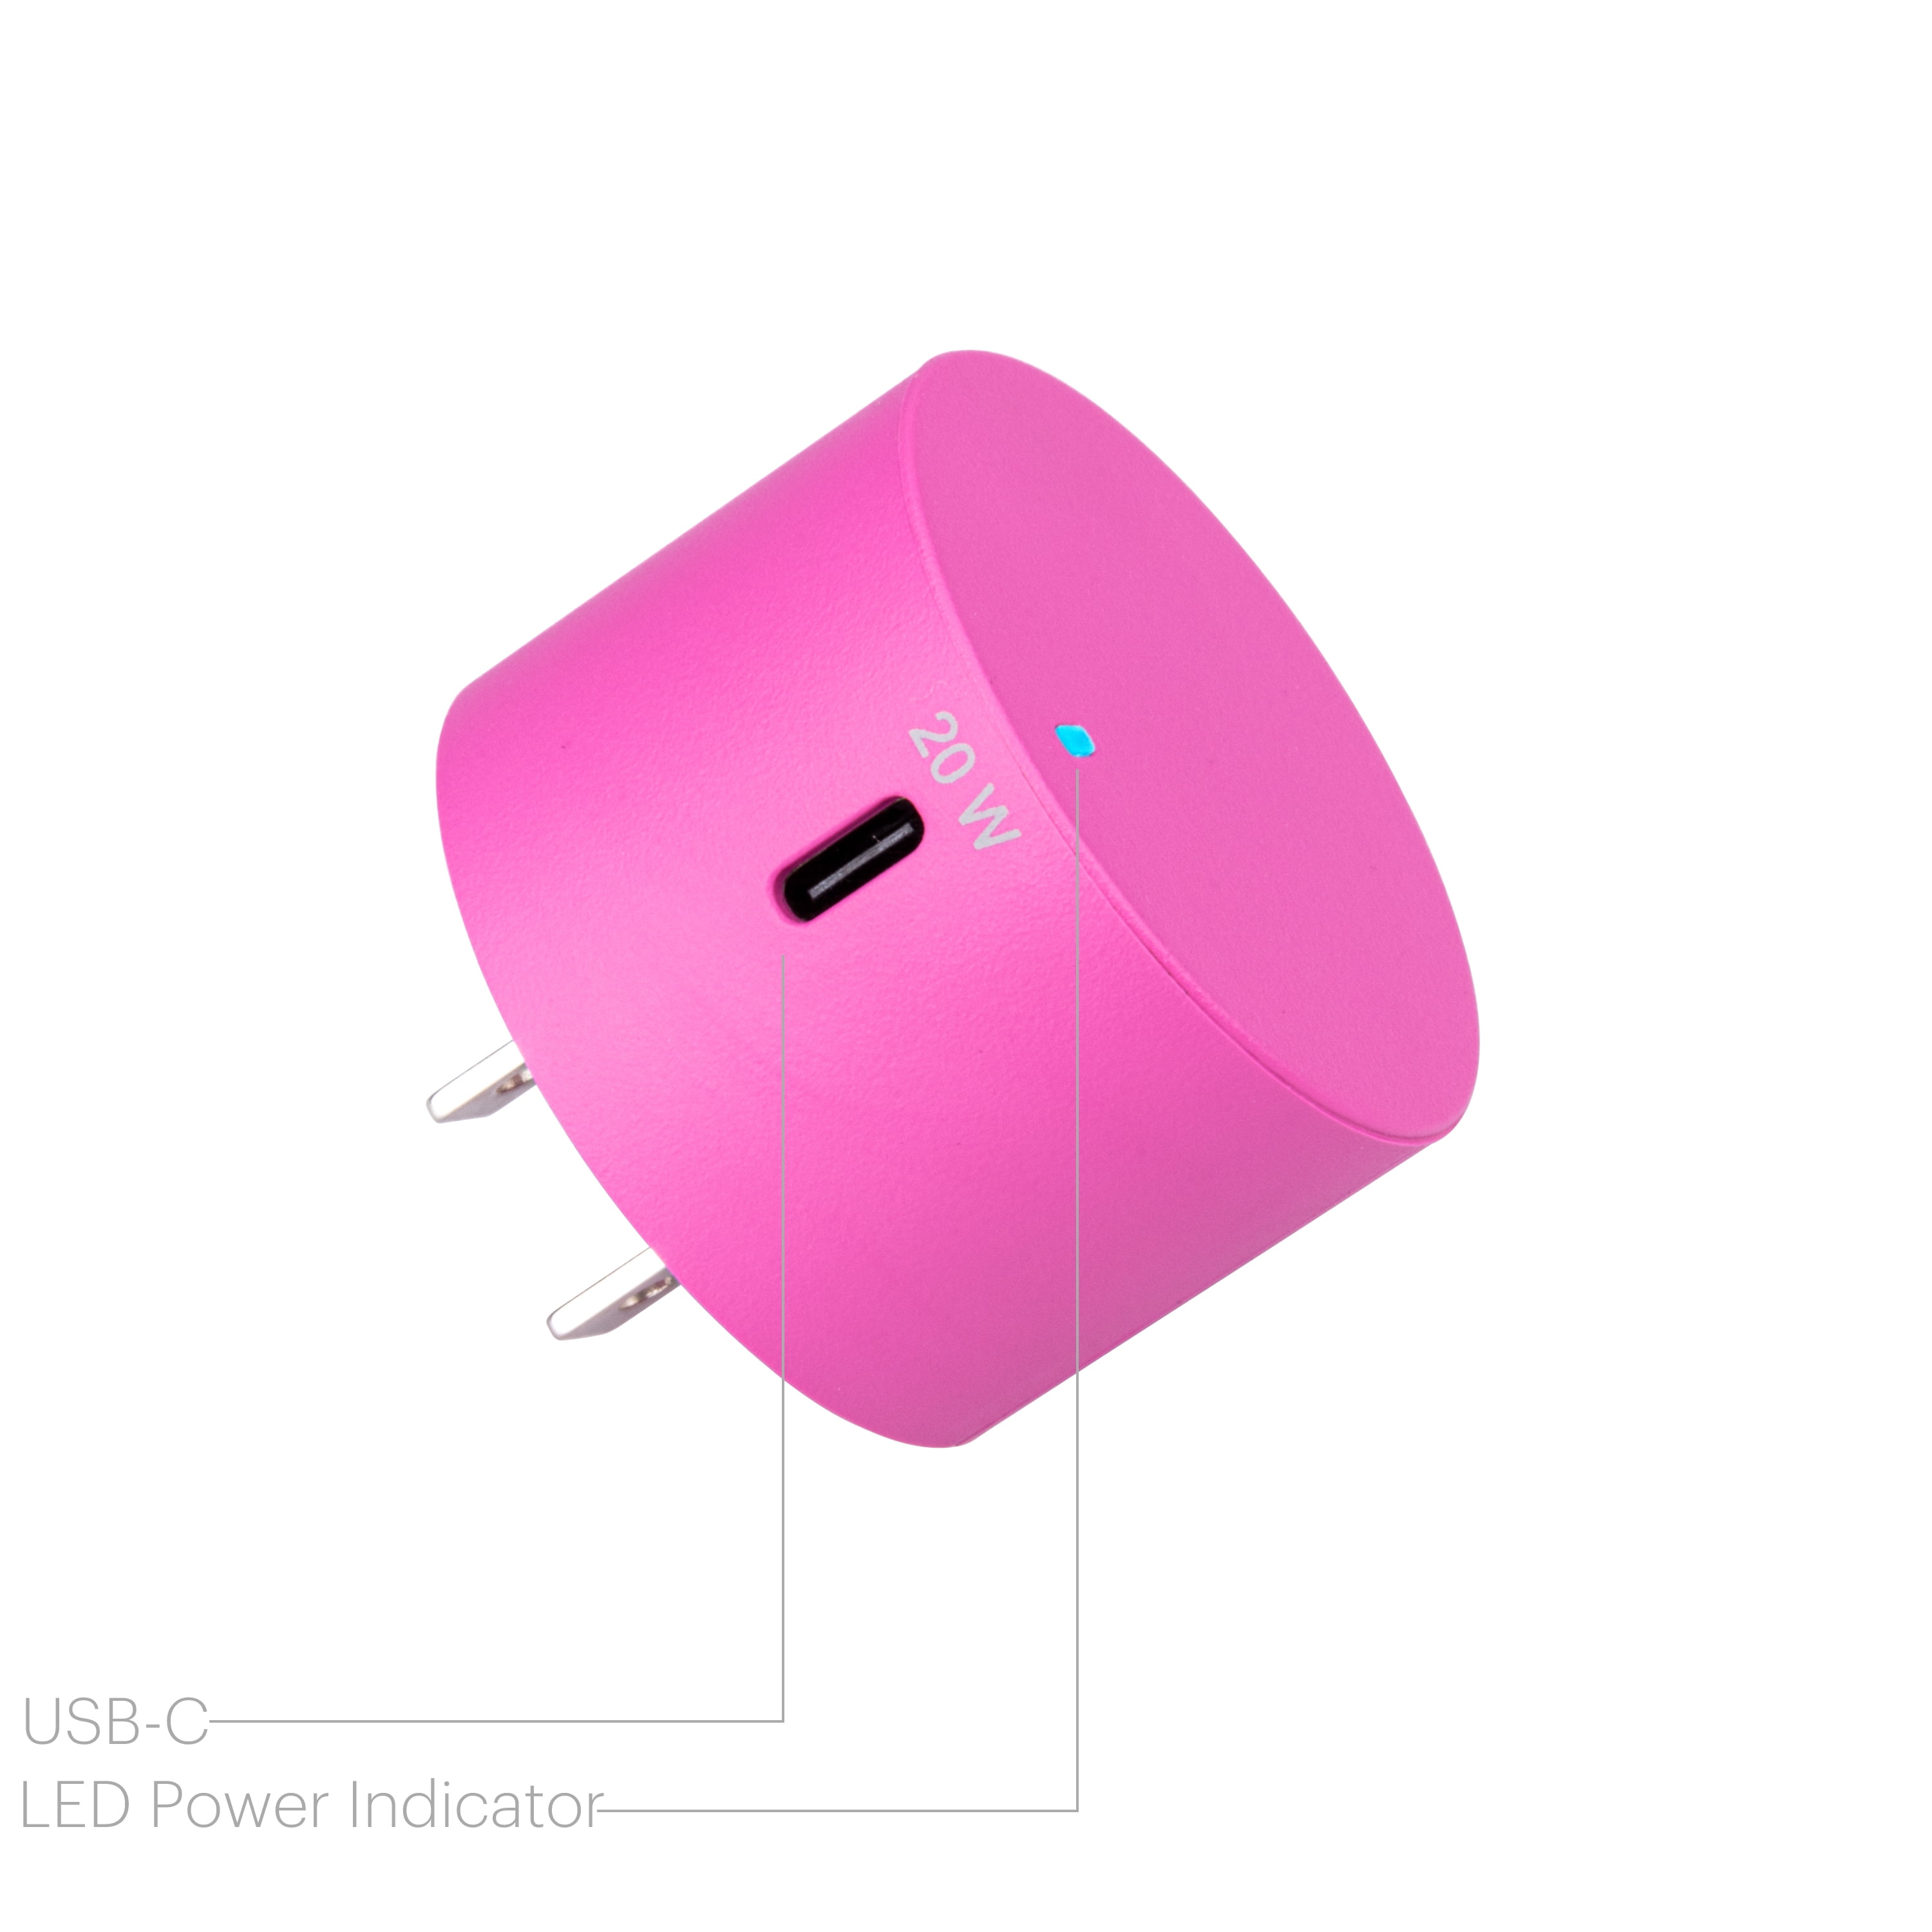 Onn. 20W USB-C Wall Charger with Power Delivery, Pink, for iPhone Models (13/12/11/se/xs/xr/8 Series), Samsung, Sony, and LG Smartphone Models